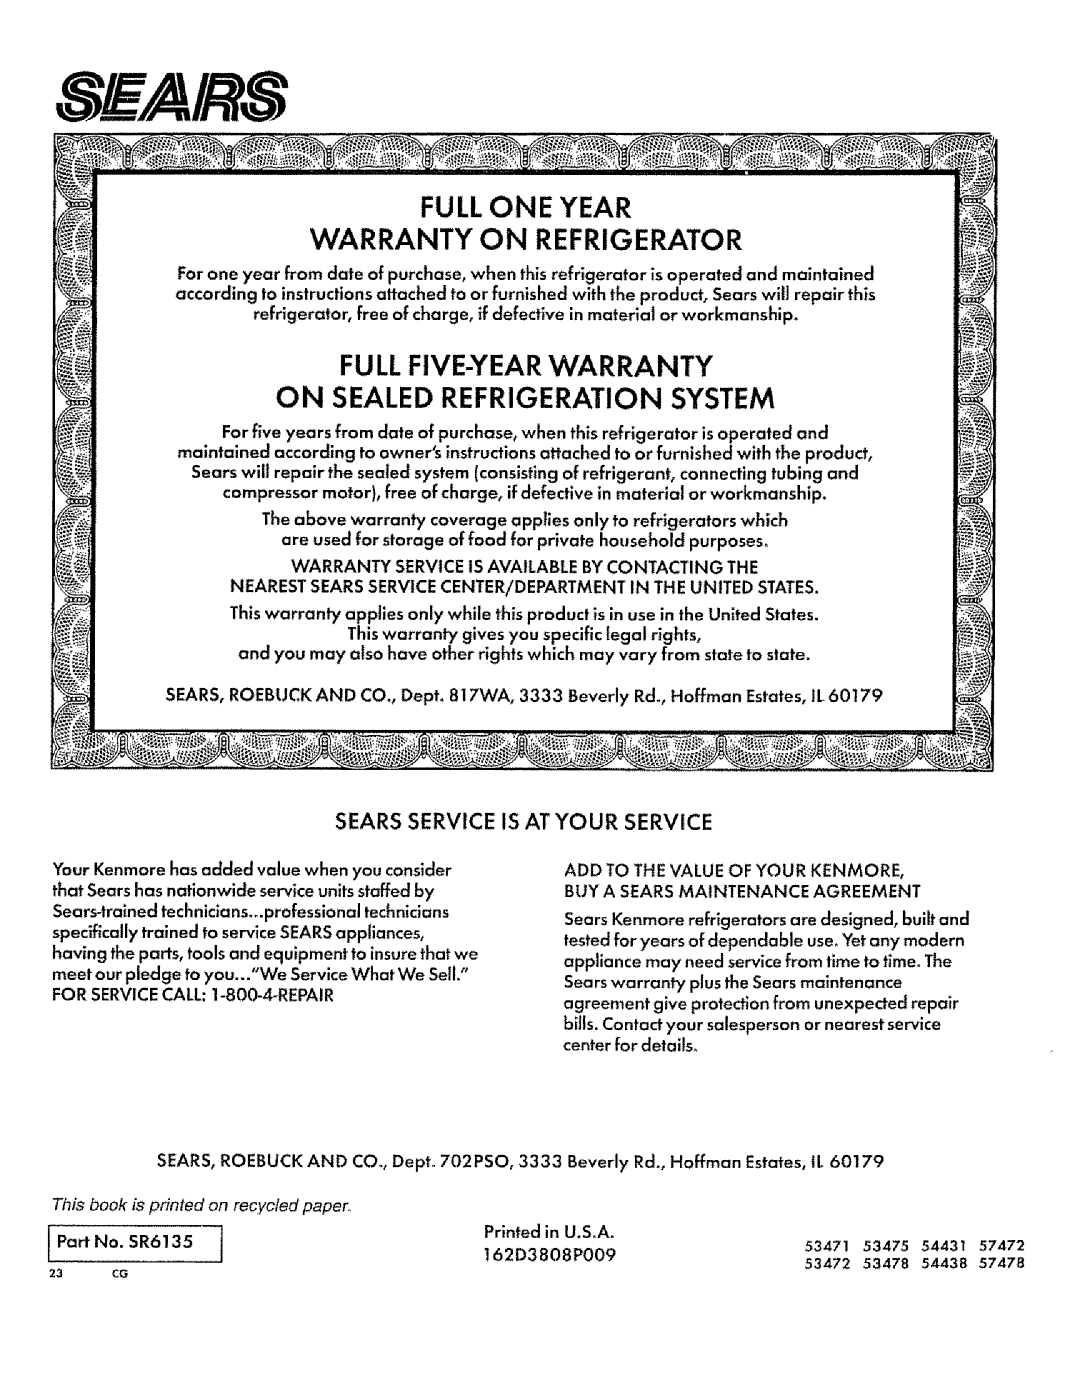 Sears 57472 Warranty On Refrigerator, On Sealed Refrigeration System, Sears Service Is At Your Service, PartNo. SR6135 